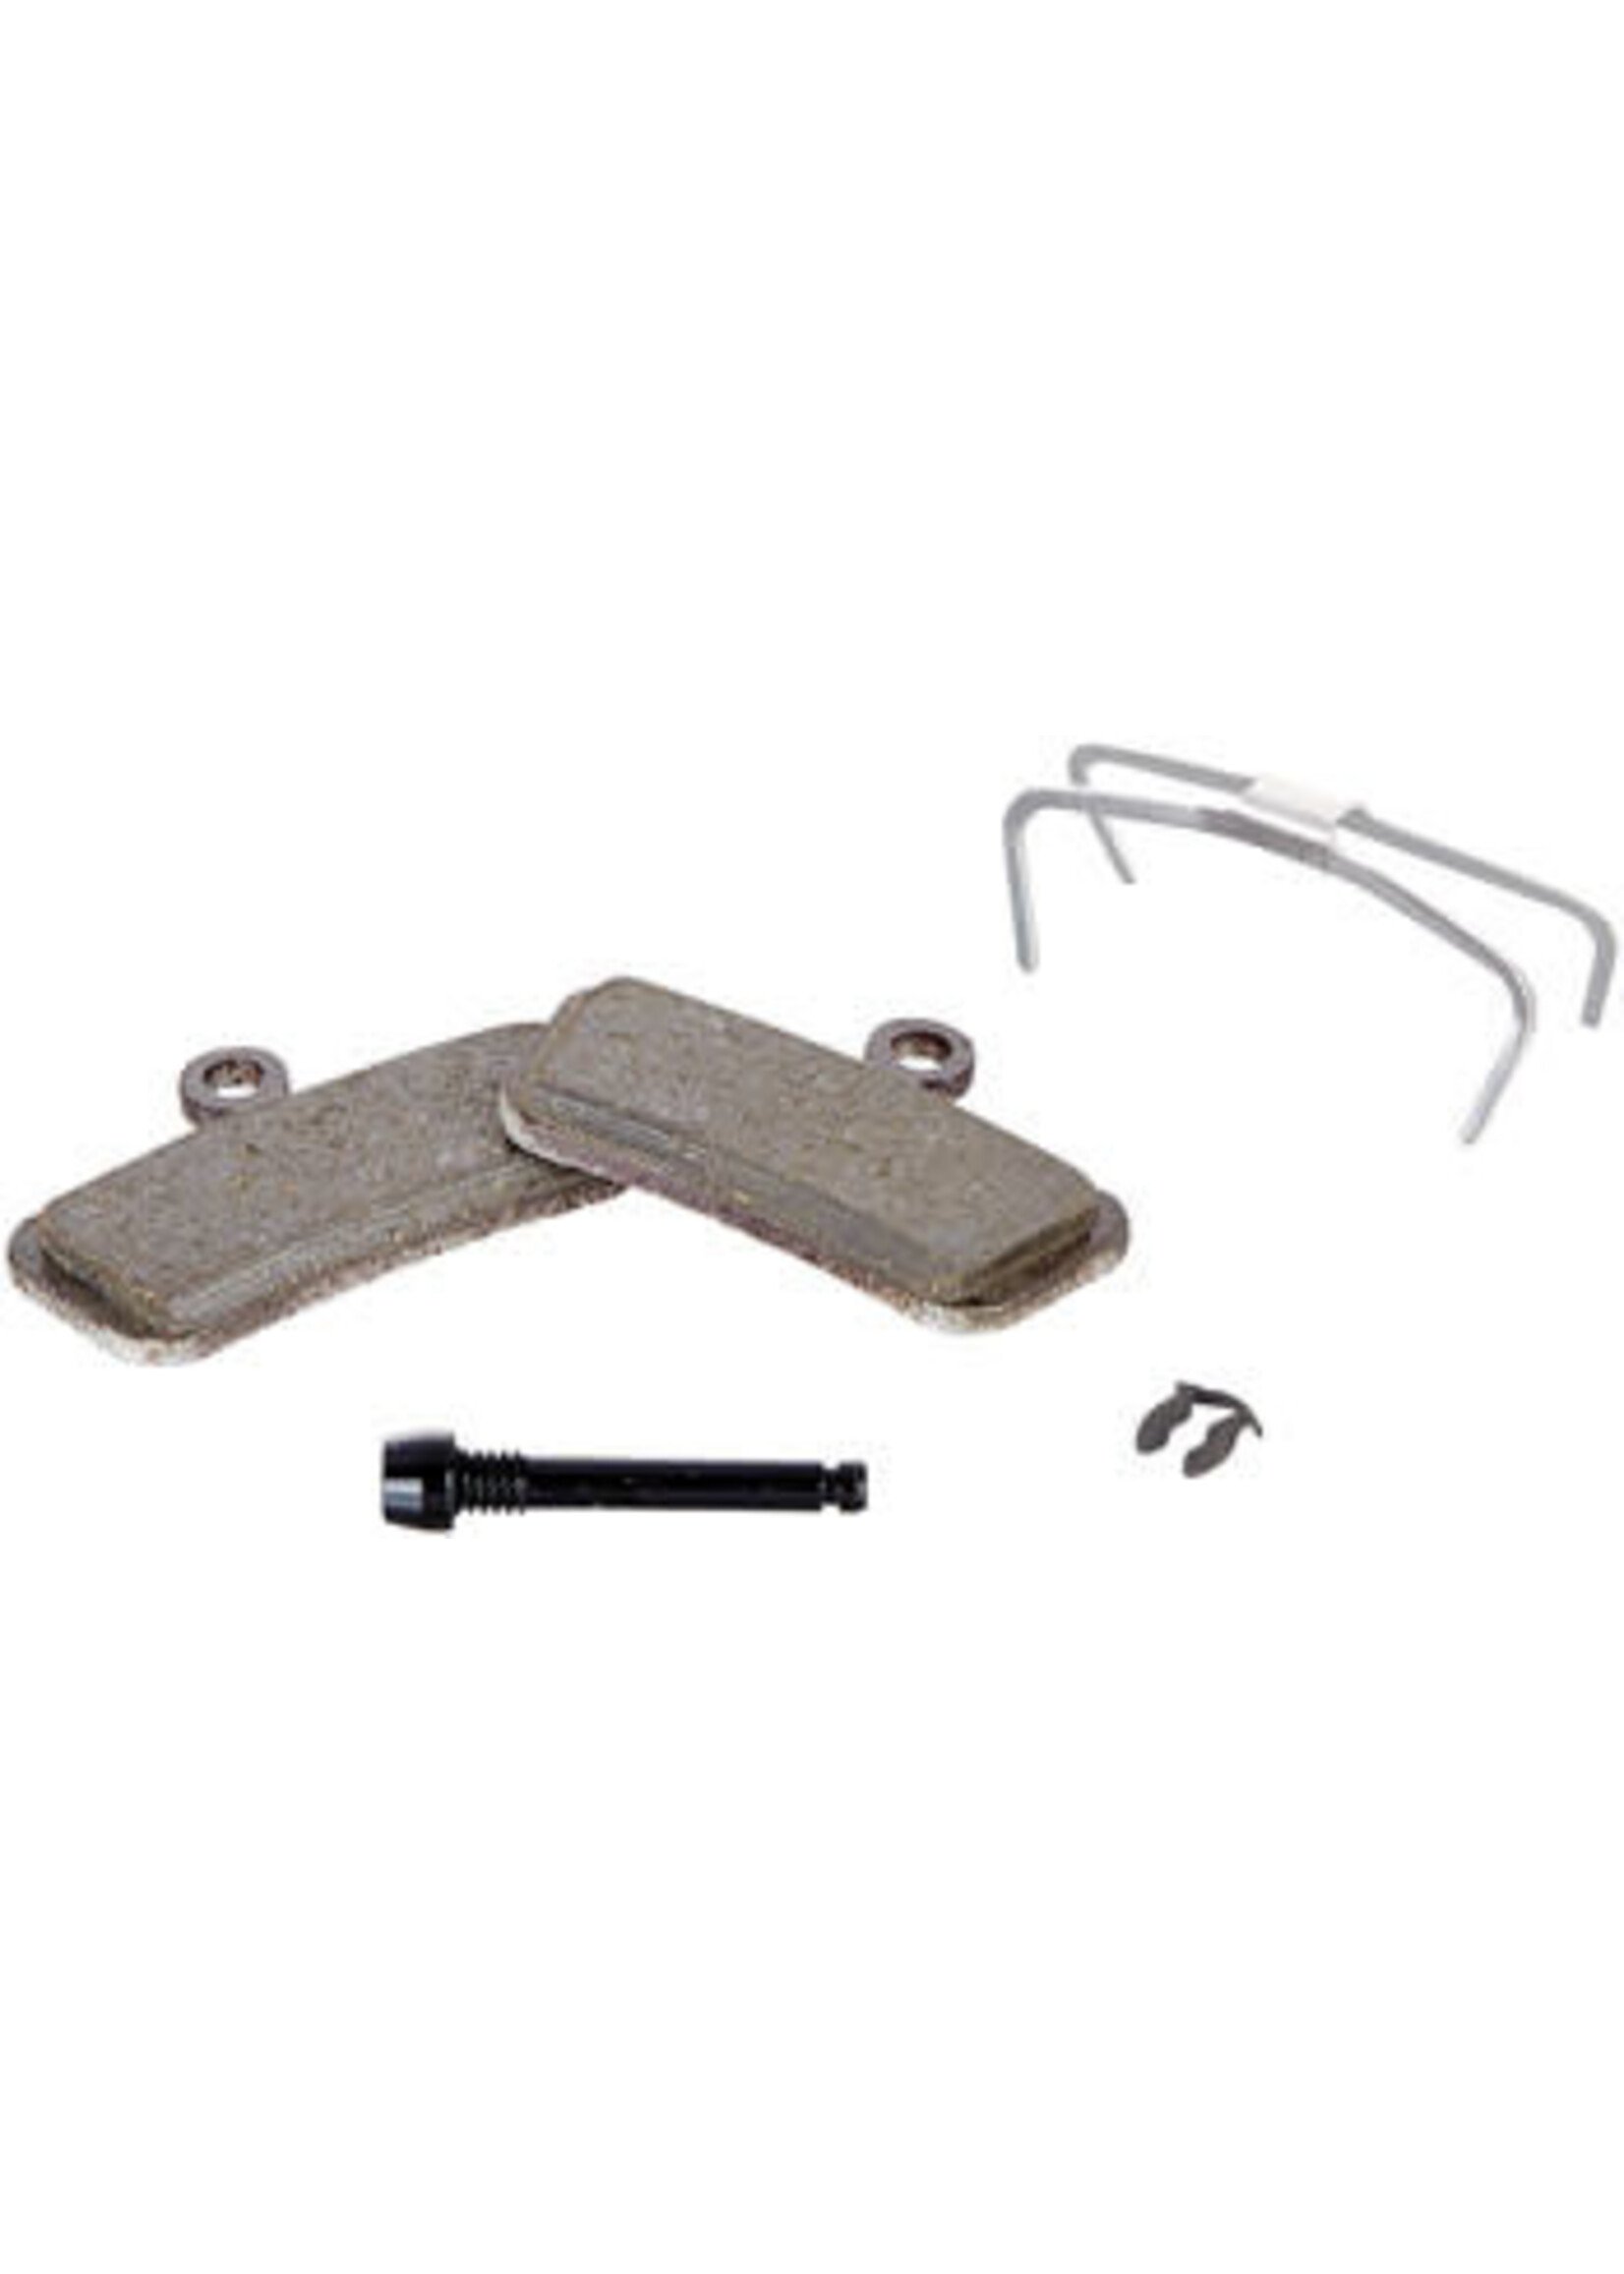 SRAM SRAM Disc Brake Pads - Organic Compound, Steel Backed, Powerful, For Trail, Guide, and G2